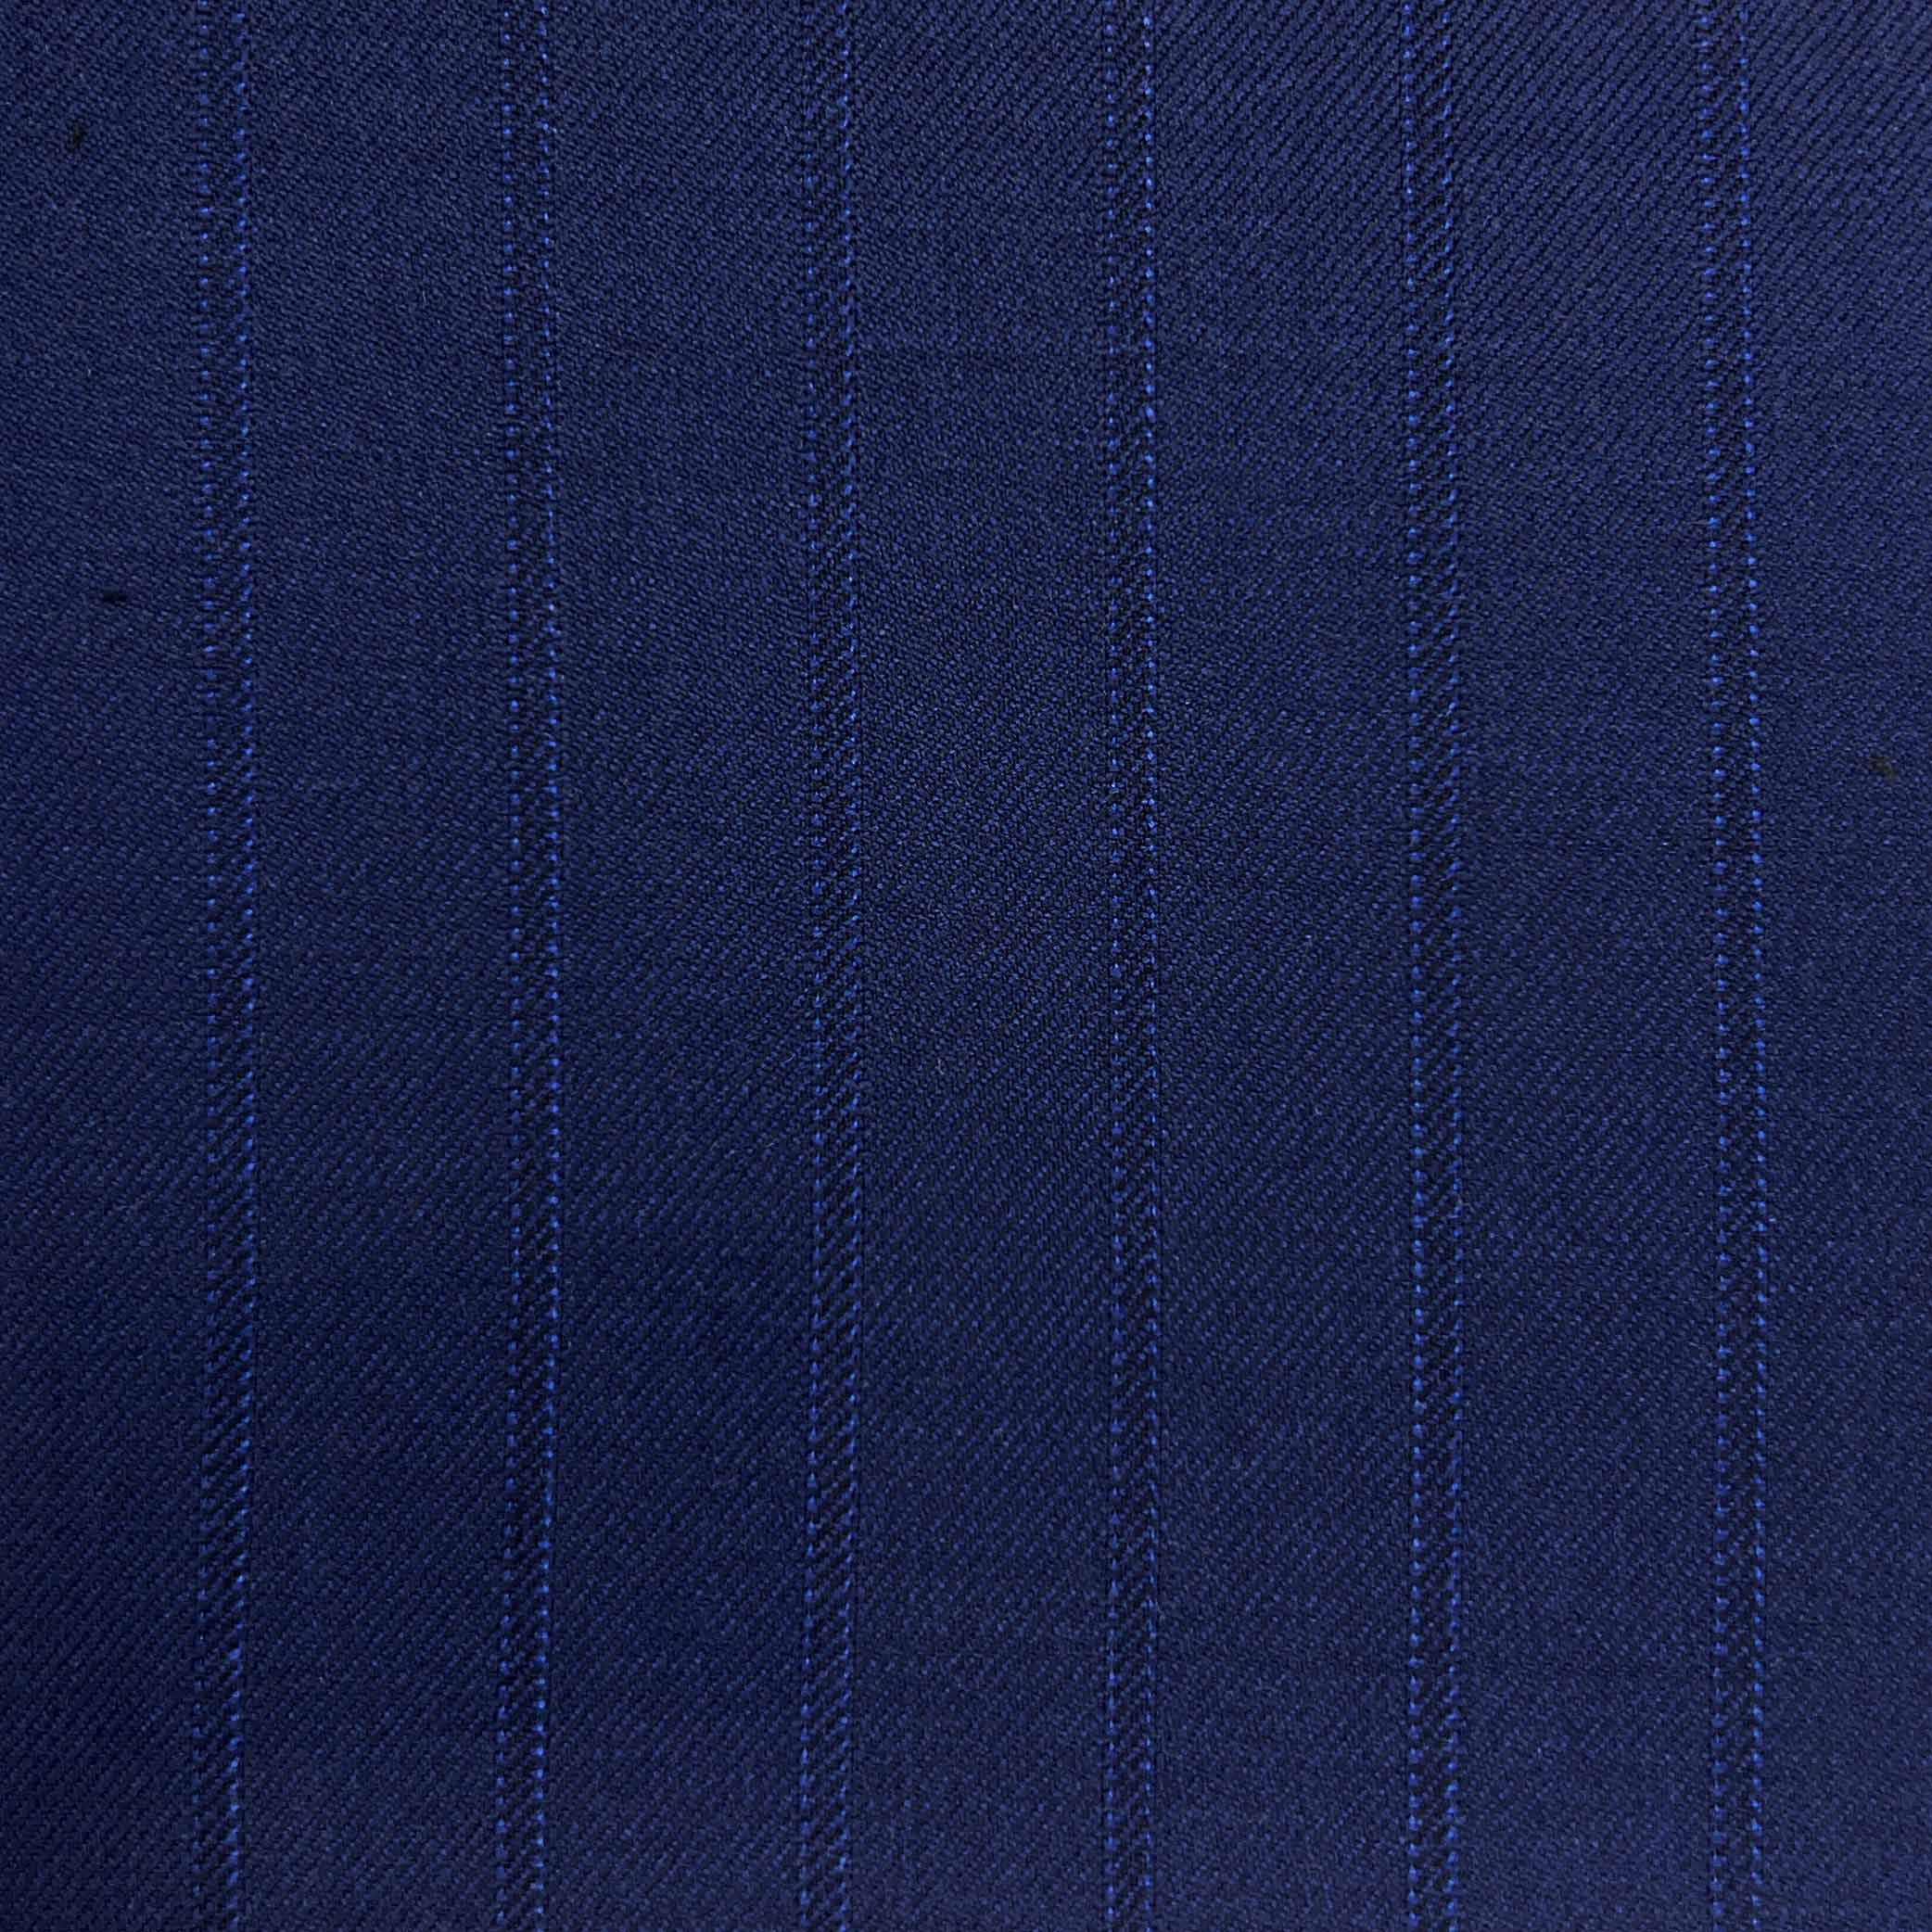 Westwood Hart Online Custom Hand Tailor Suits Sportcoats Trousers Waistcoats Overcoats Navy 5/8" Wide Double Stripes Design